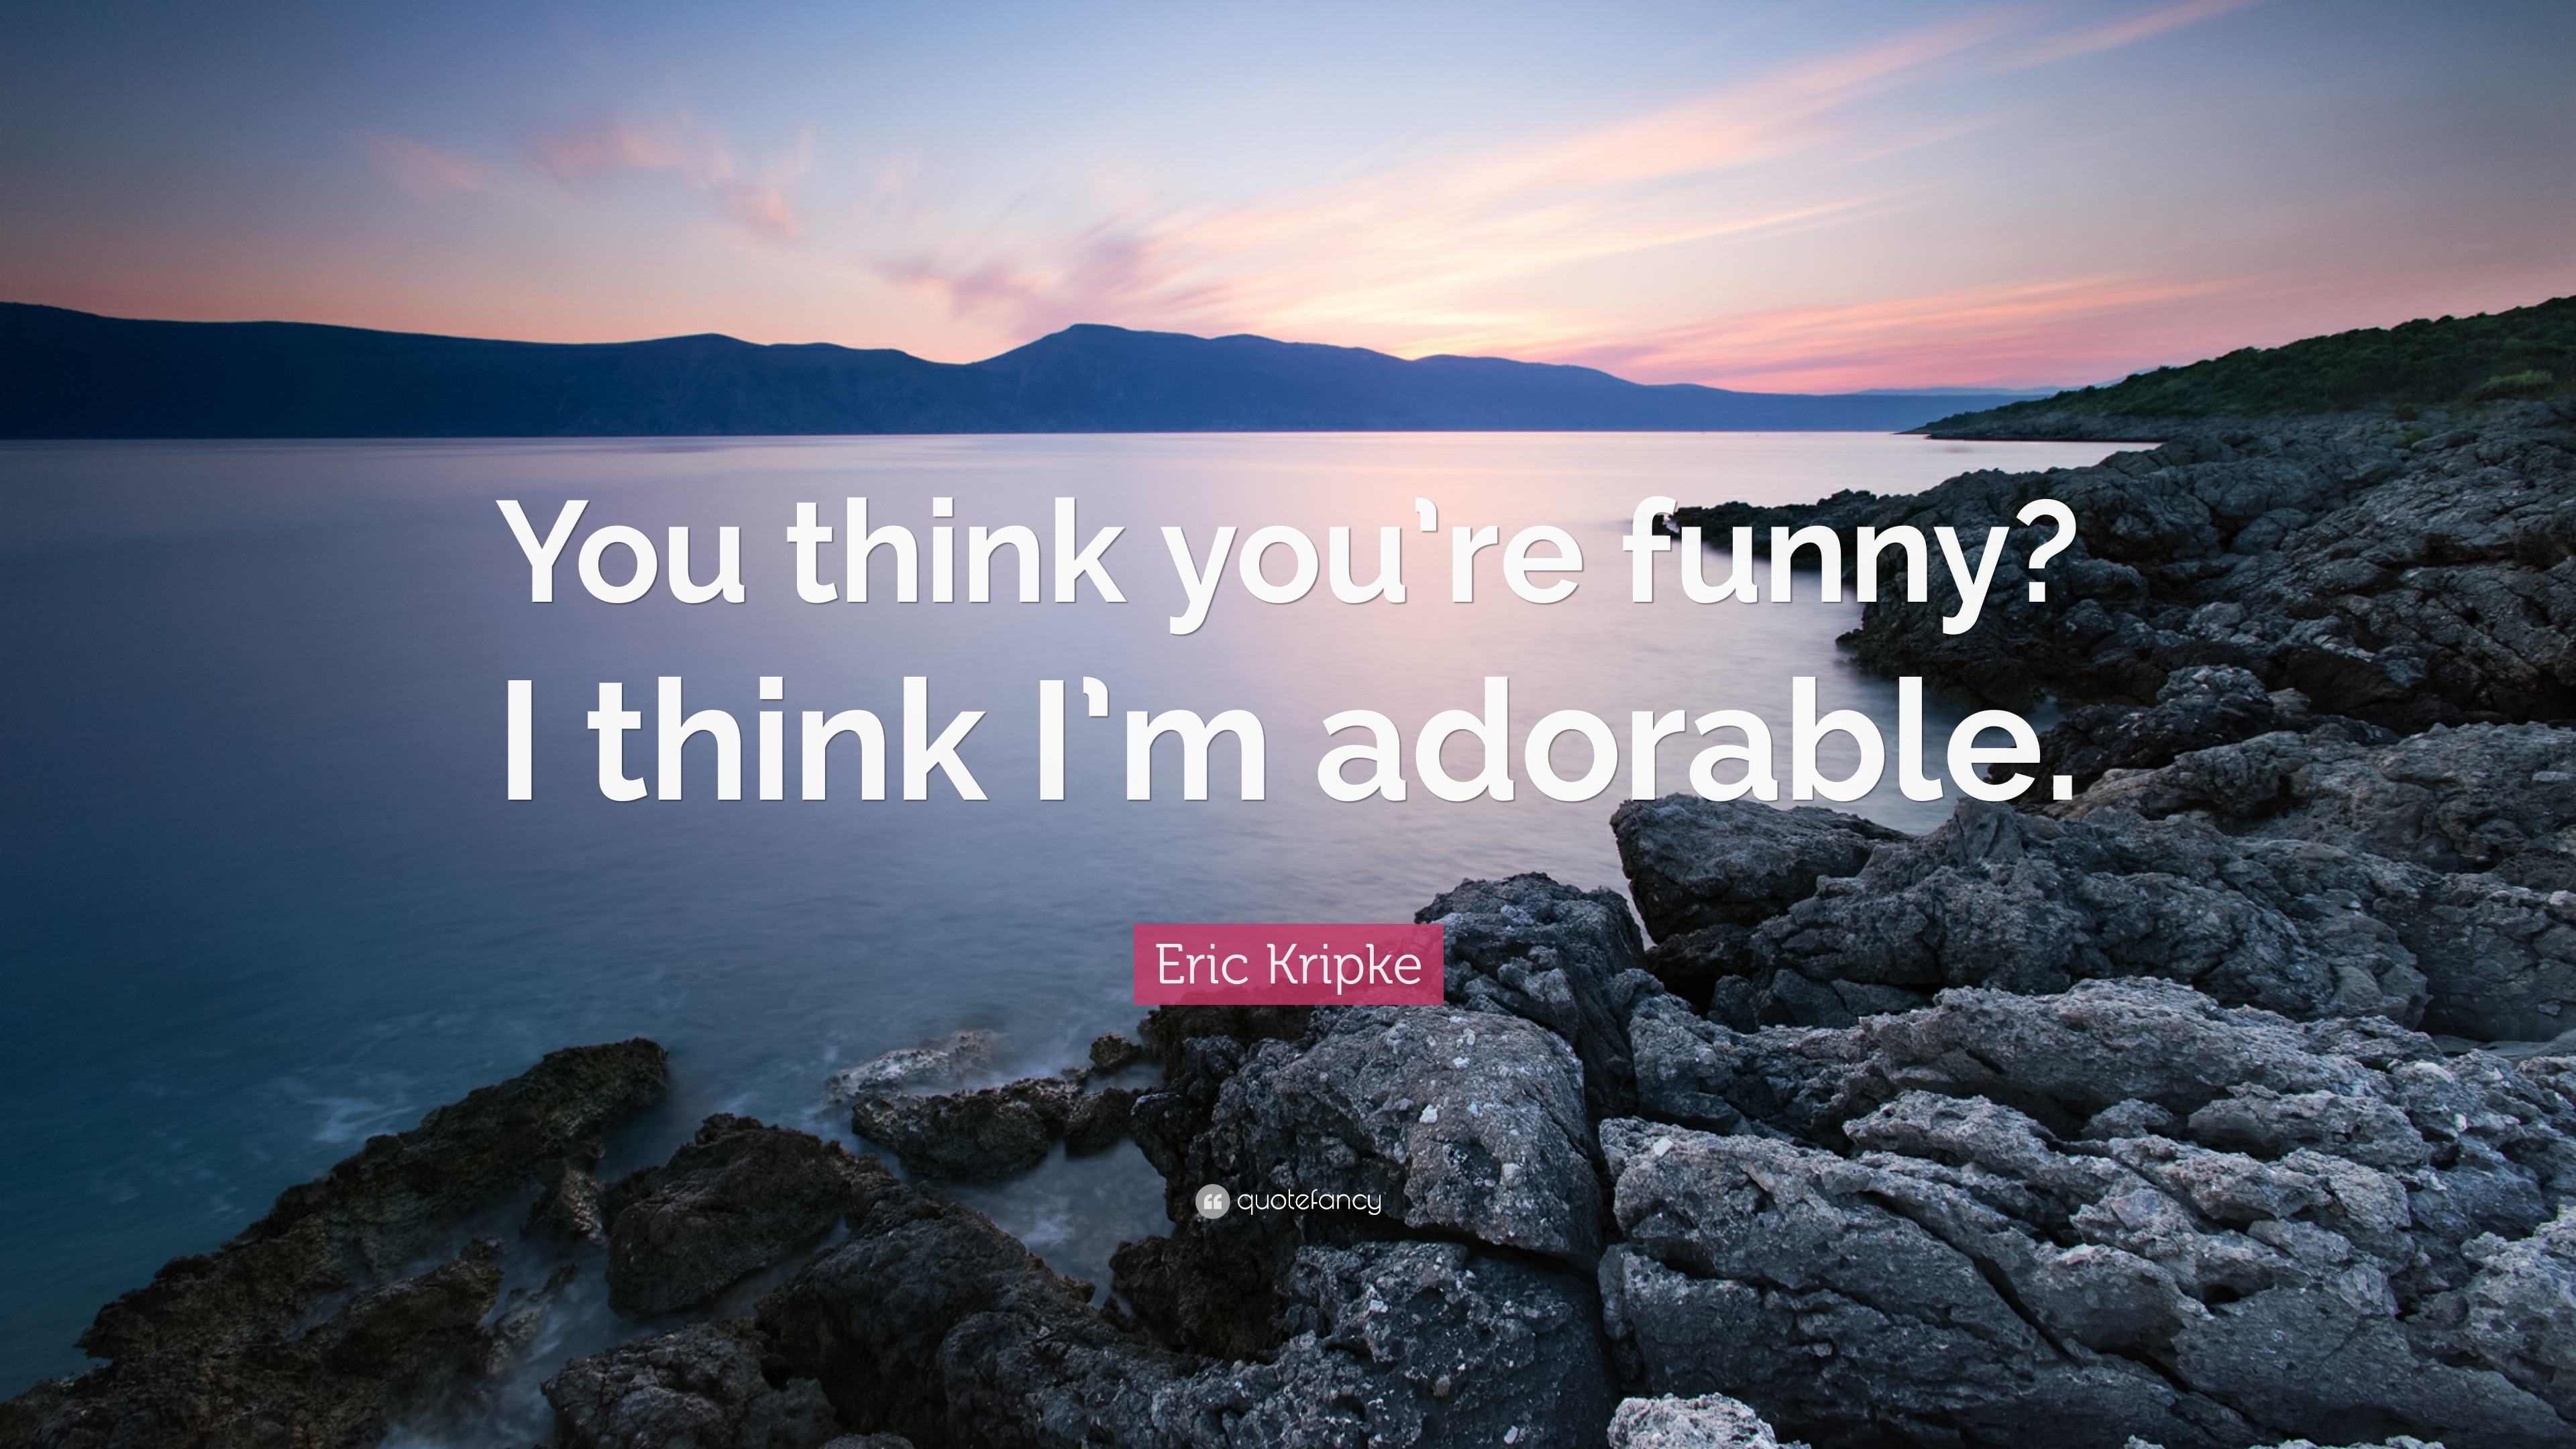 Eric Kripke Quote: “You think you're funny? I think I'm adorable.”